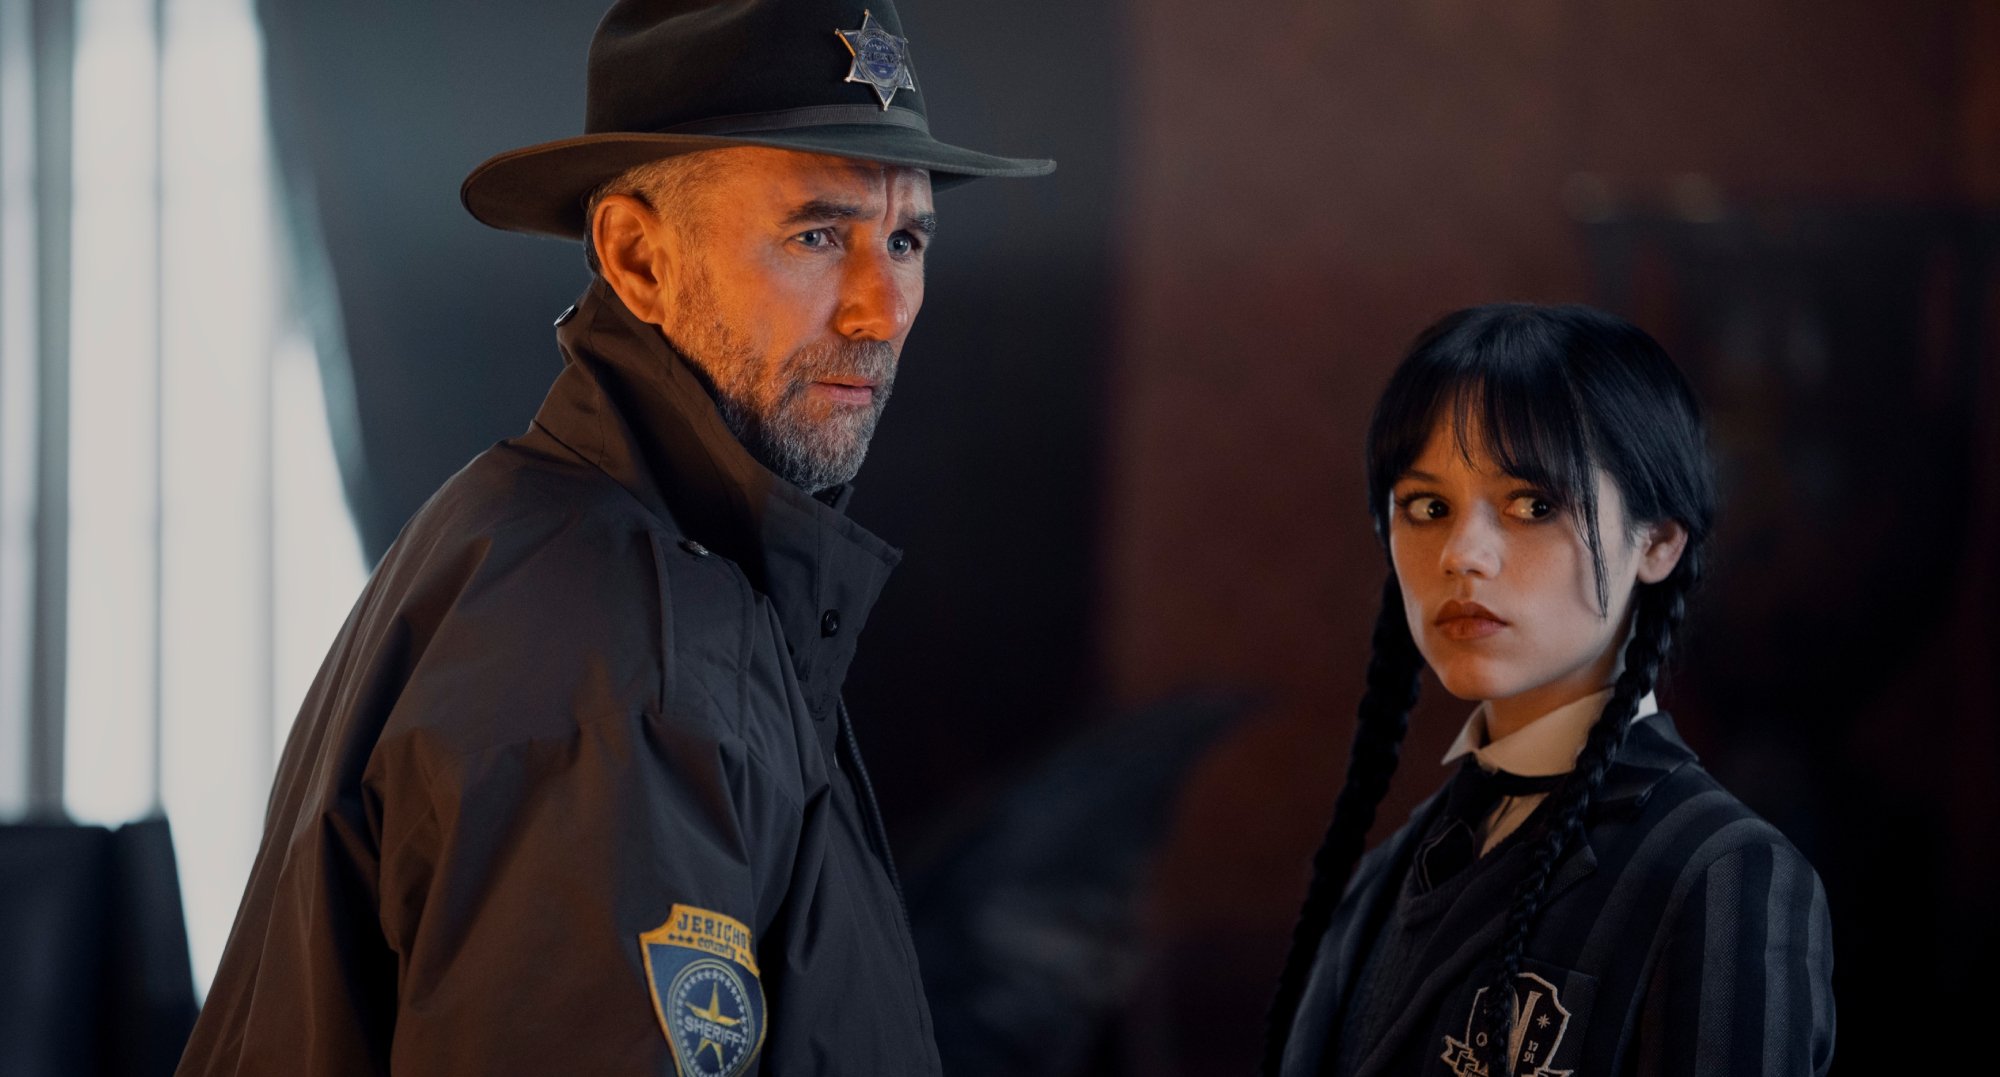 Sheriff Galpin and Wednesday Addams track a killer in 'Wednesday' series.